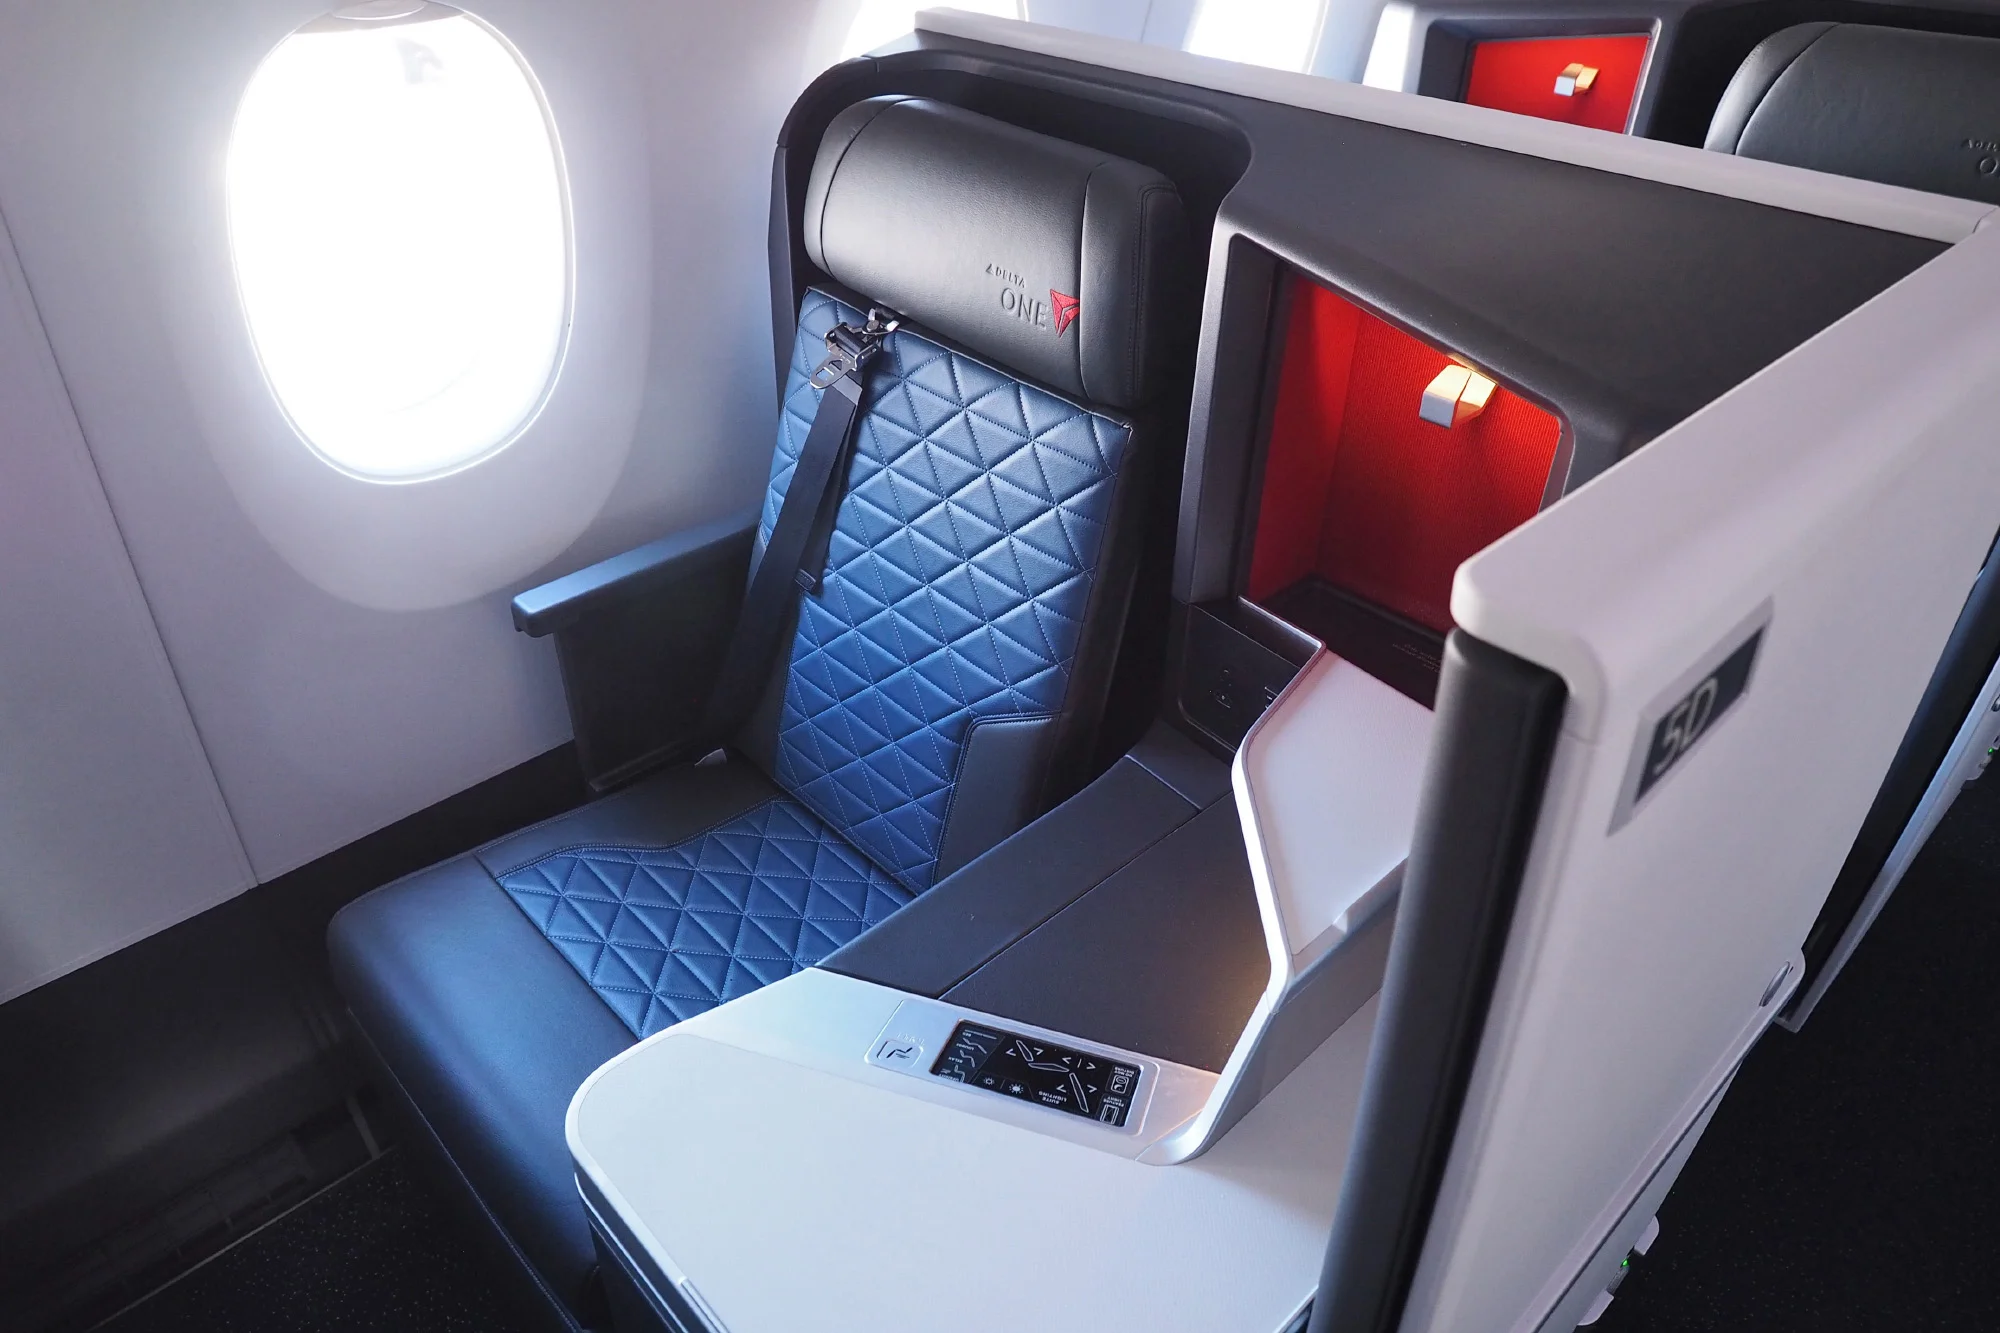 Delta One Suites on the A350.